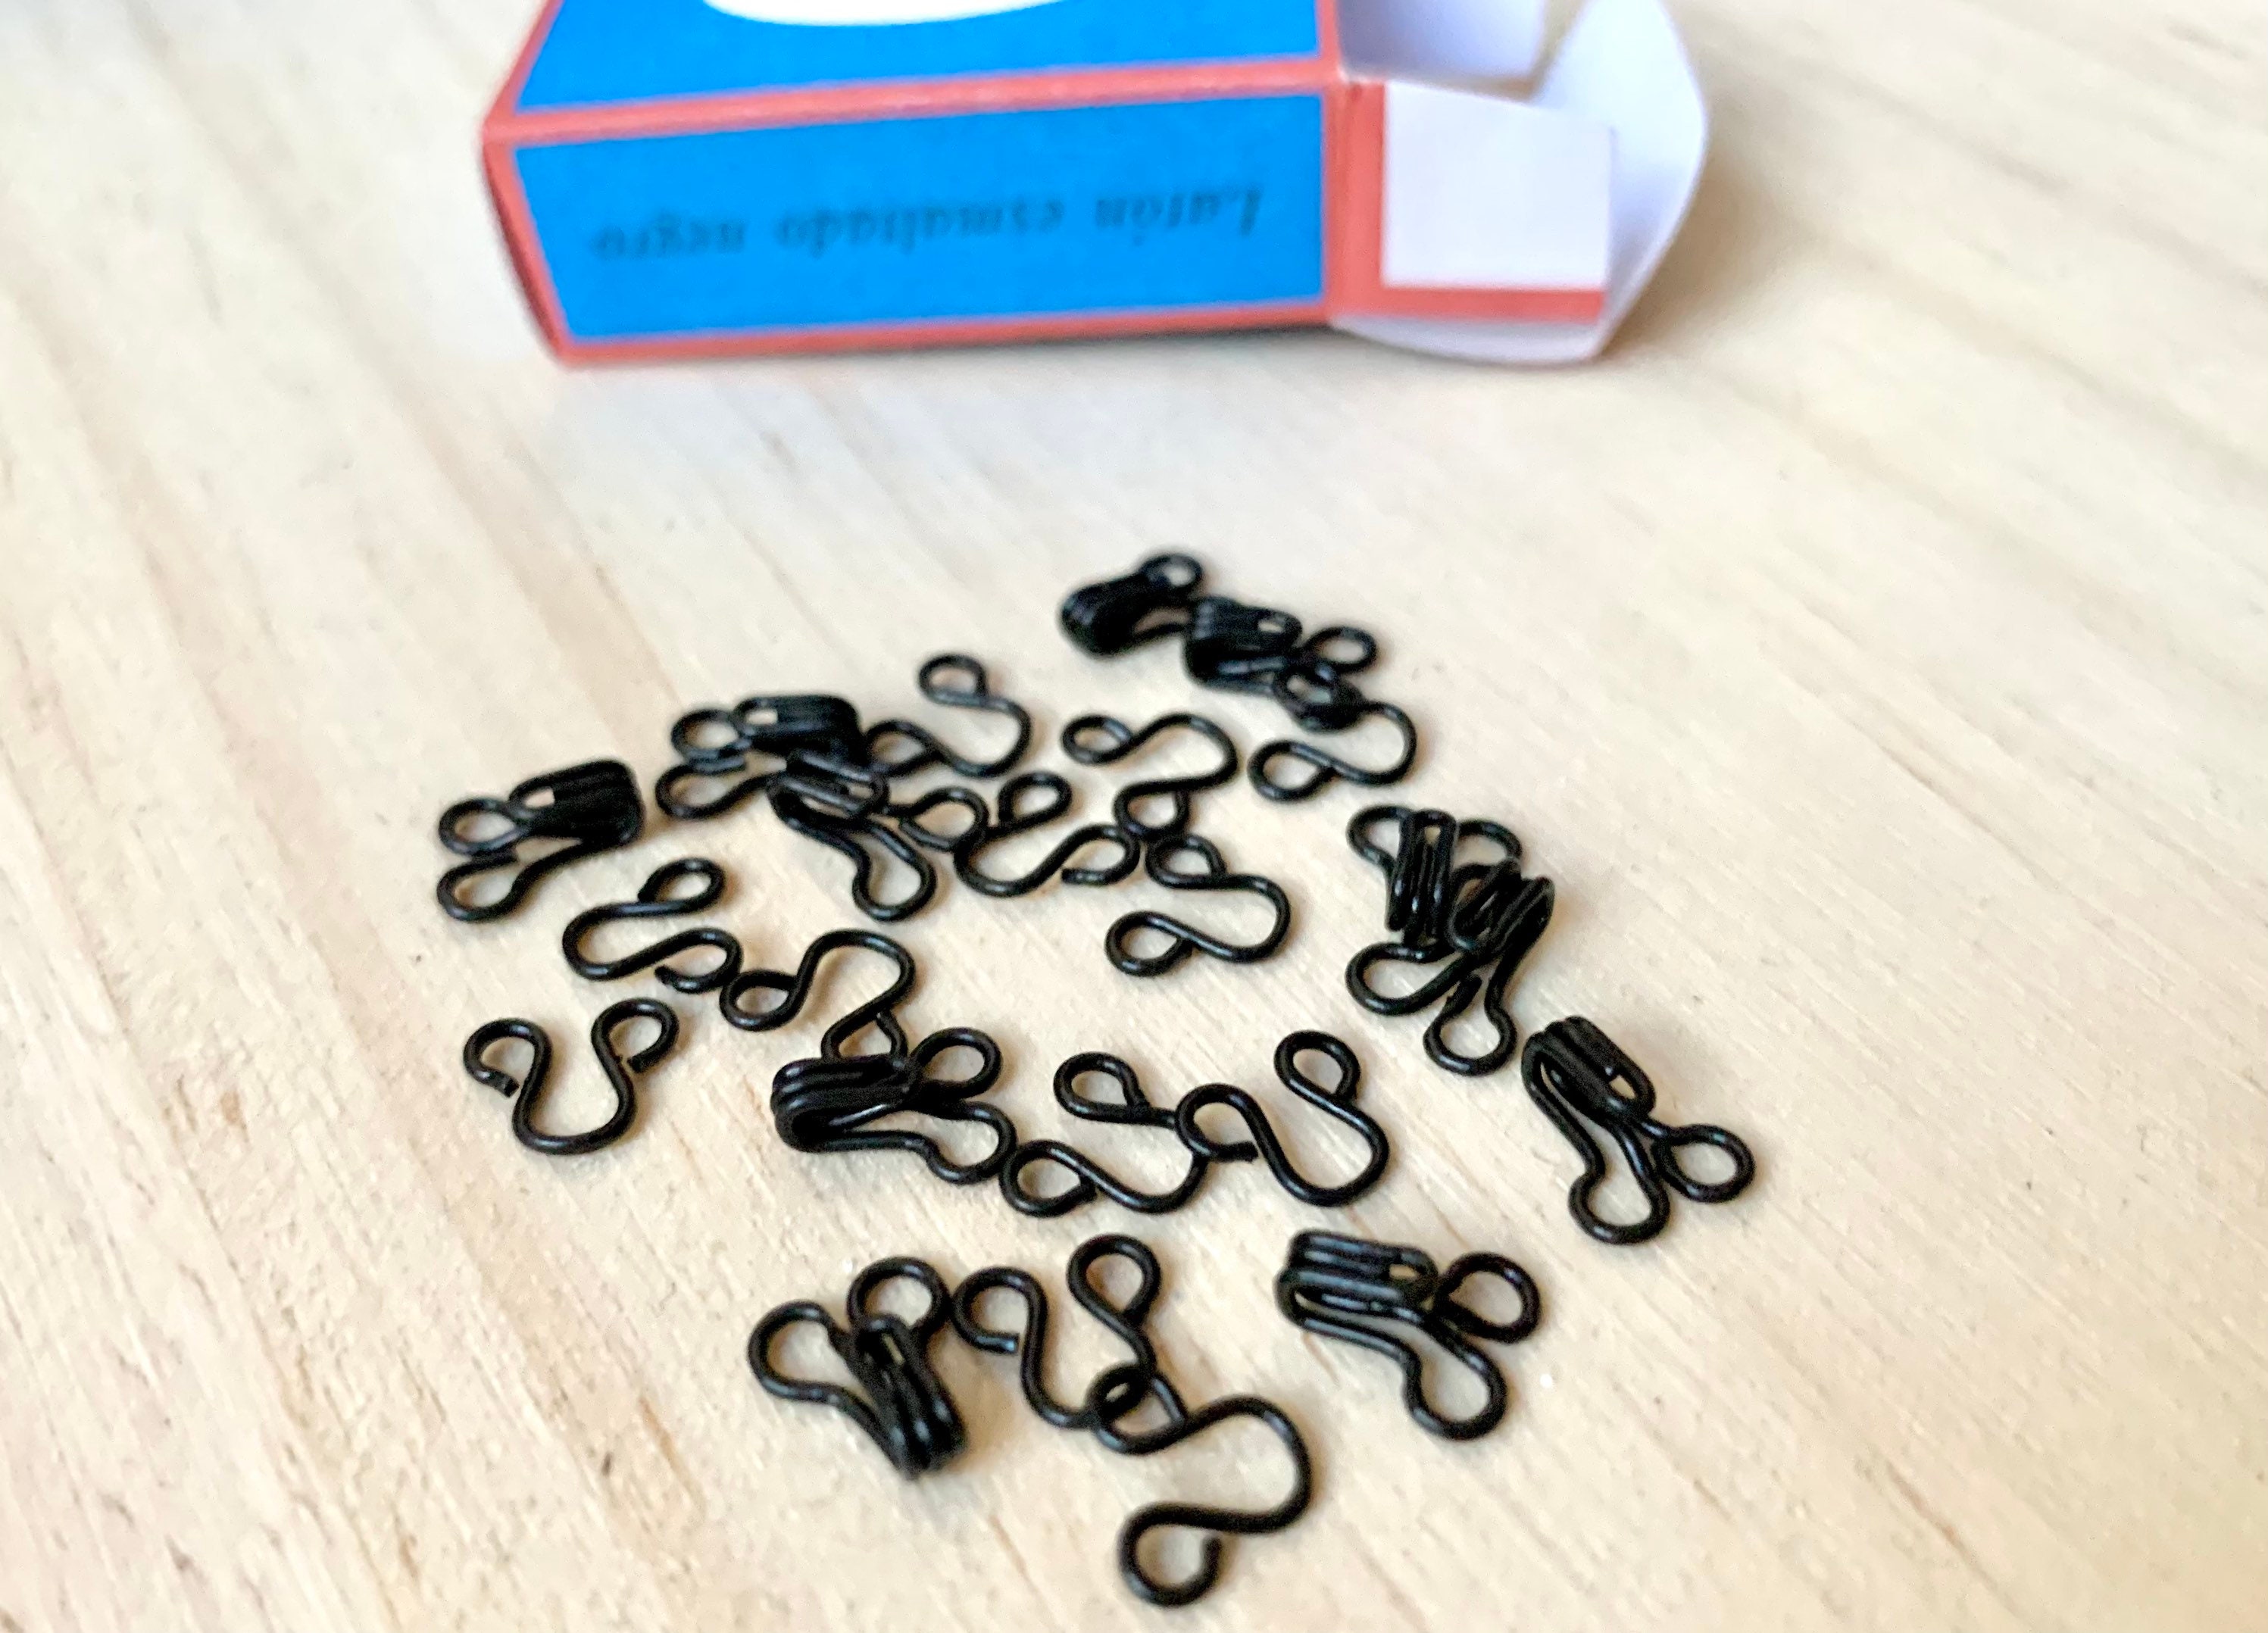 40 Set Bra Hooks And Eyes Sewing Hooks And Eyes Closure Metal Hook And Eye  Latch For Clothing For Bra Clothing Skirt Sewing DIY Craft